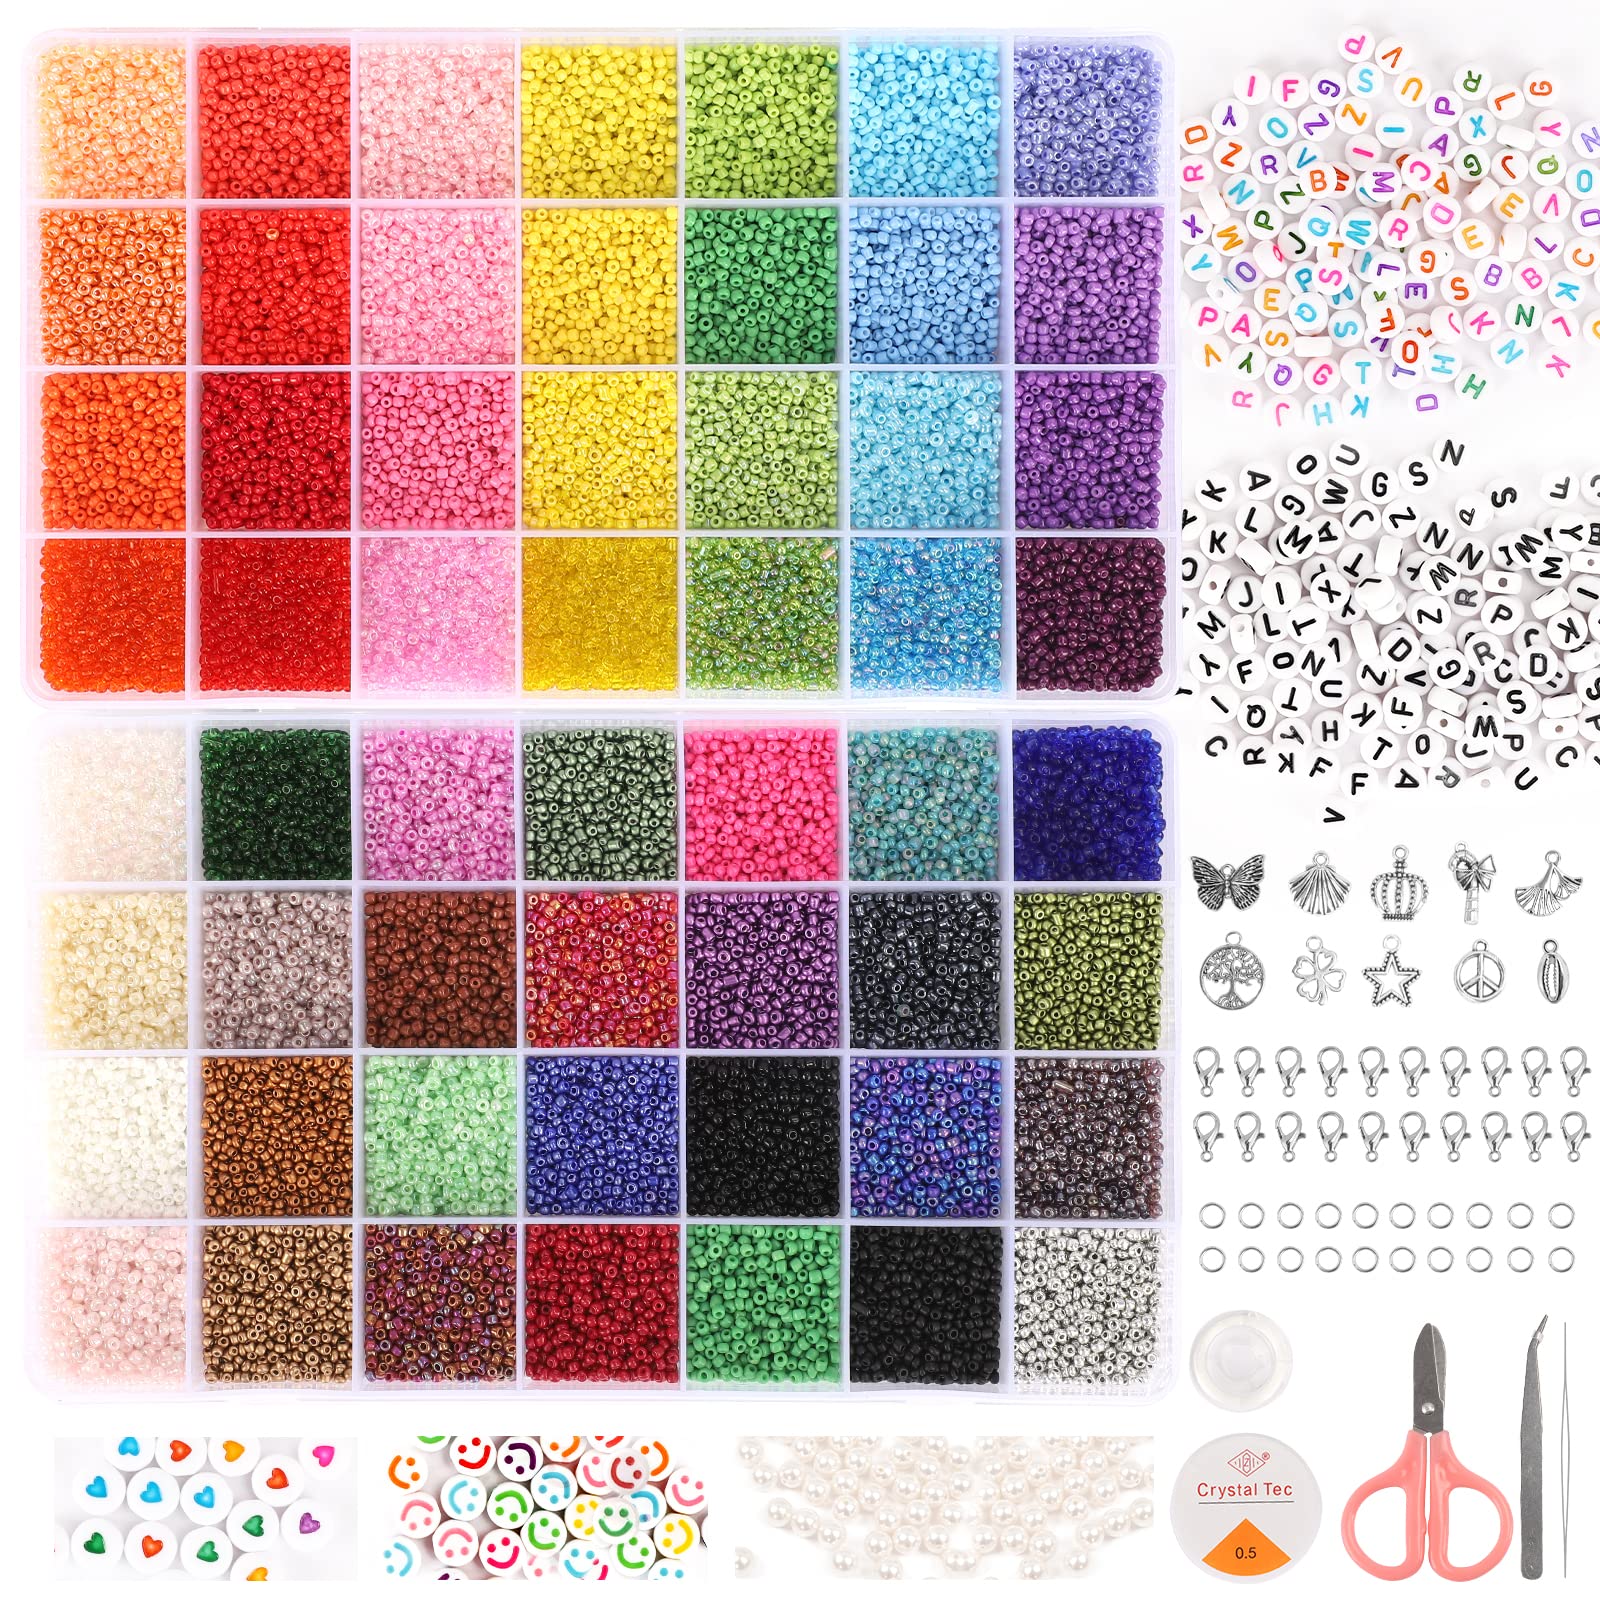 Quefe 45000pcs Glass Seed Beads for Bracelet Making Kit 56 Colors 2mm Small  Beads for Jewelry Making 260pcs Letter Beads for Crafts Gifts